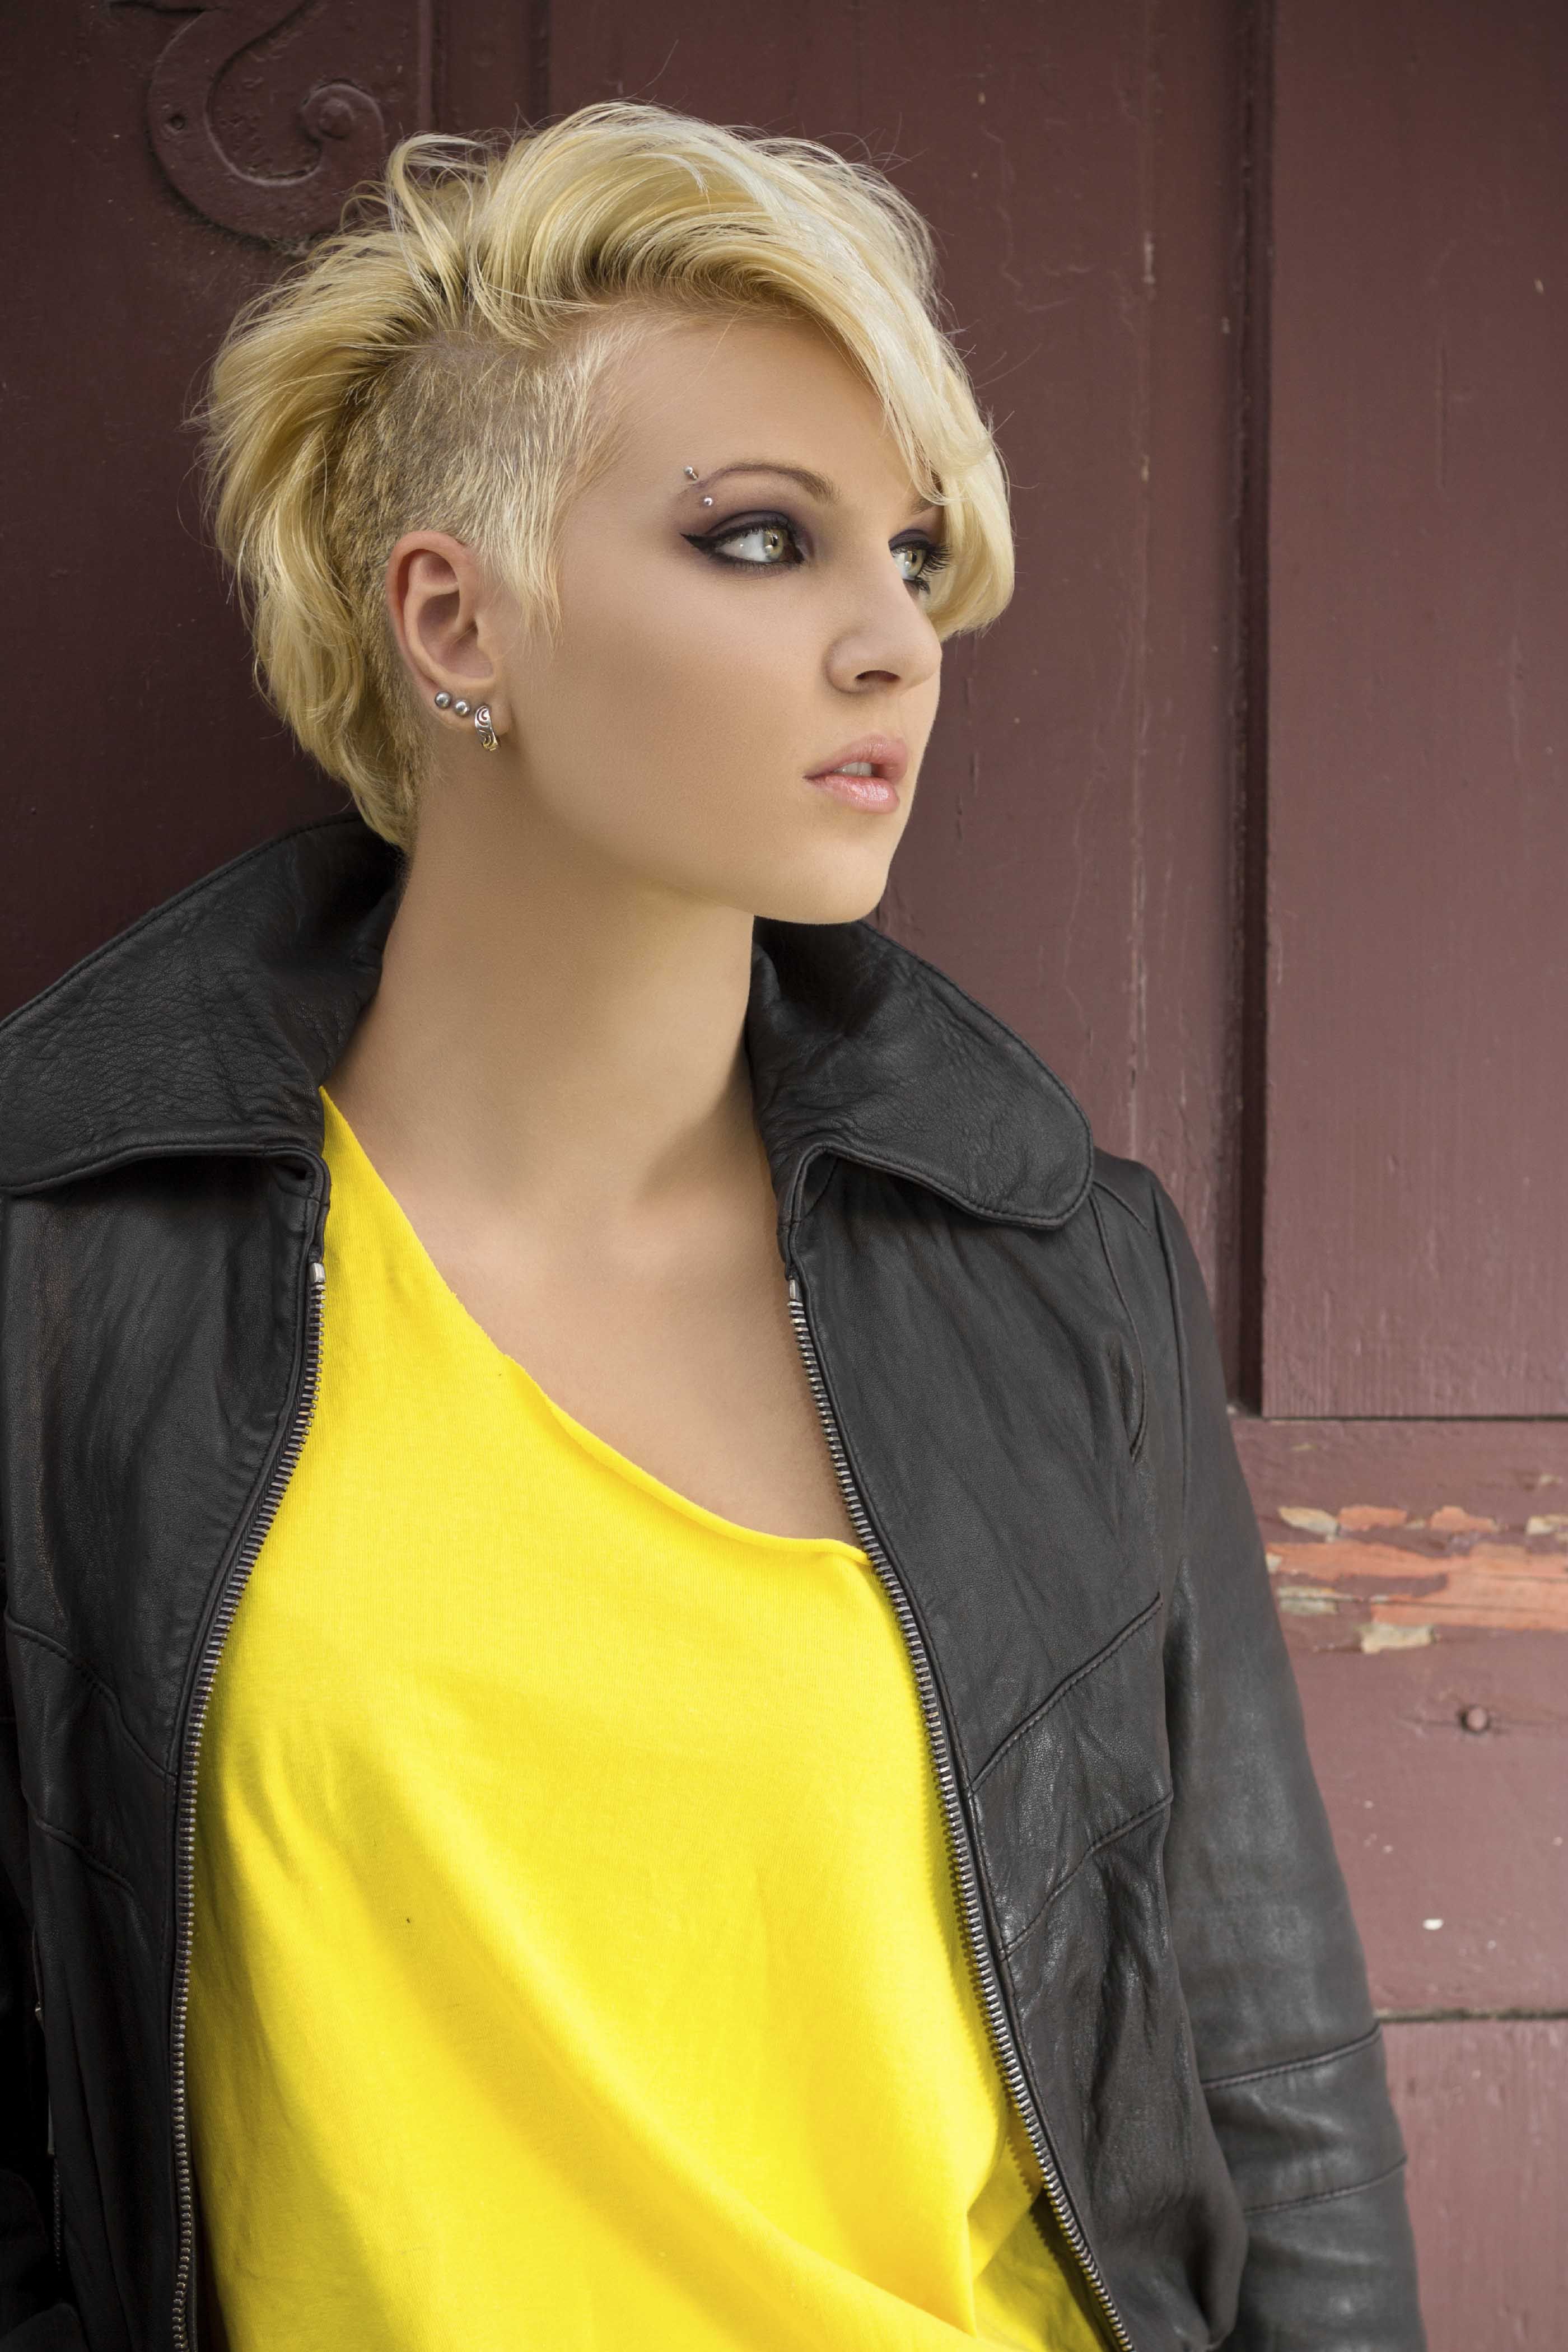 2017 Blonde Mohawk Hairstyles Throughout 8 Fashionable Mohawk Hairstyles For Women: From Haute To Head Turning (View 10 of 20)